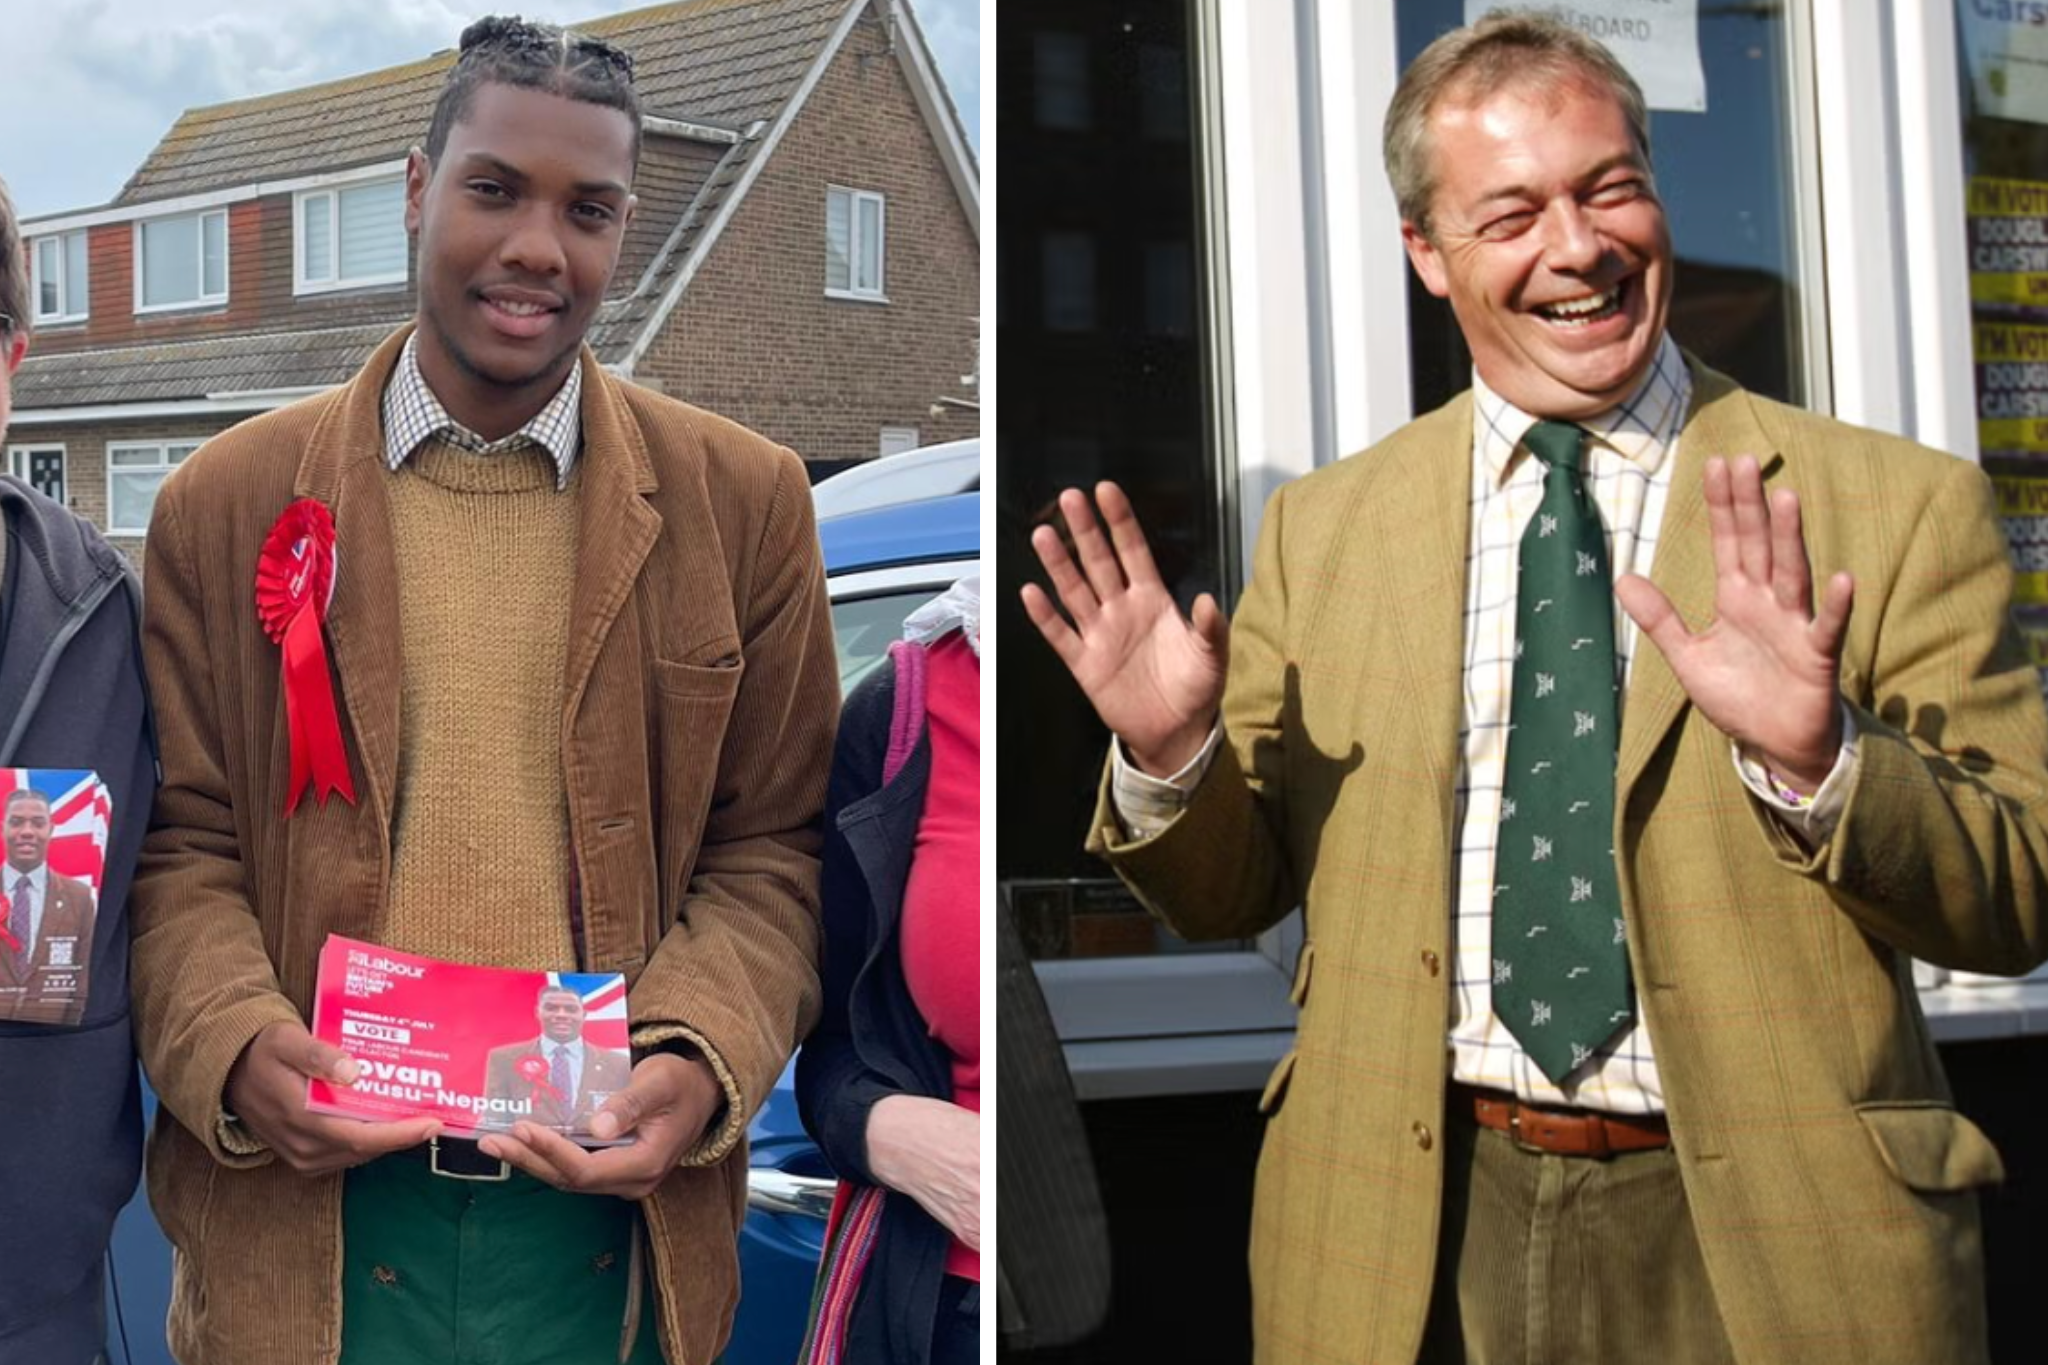 nigel farage, clacton, ‘mp for menswear’: labour’s candidate battling farage for clacton seat becomes unlikely fashion hit